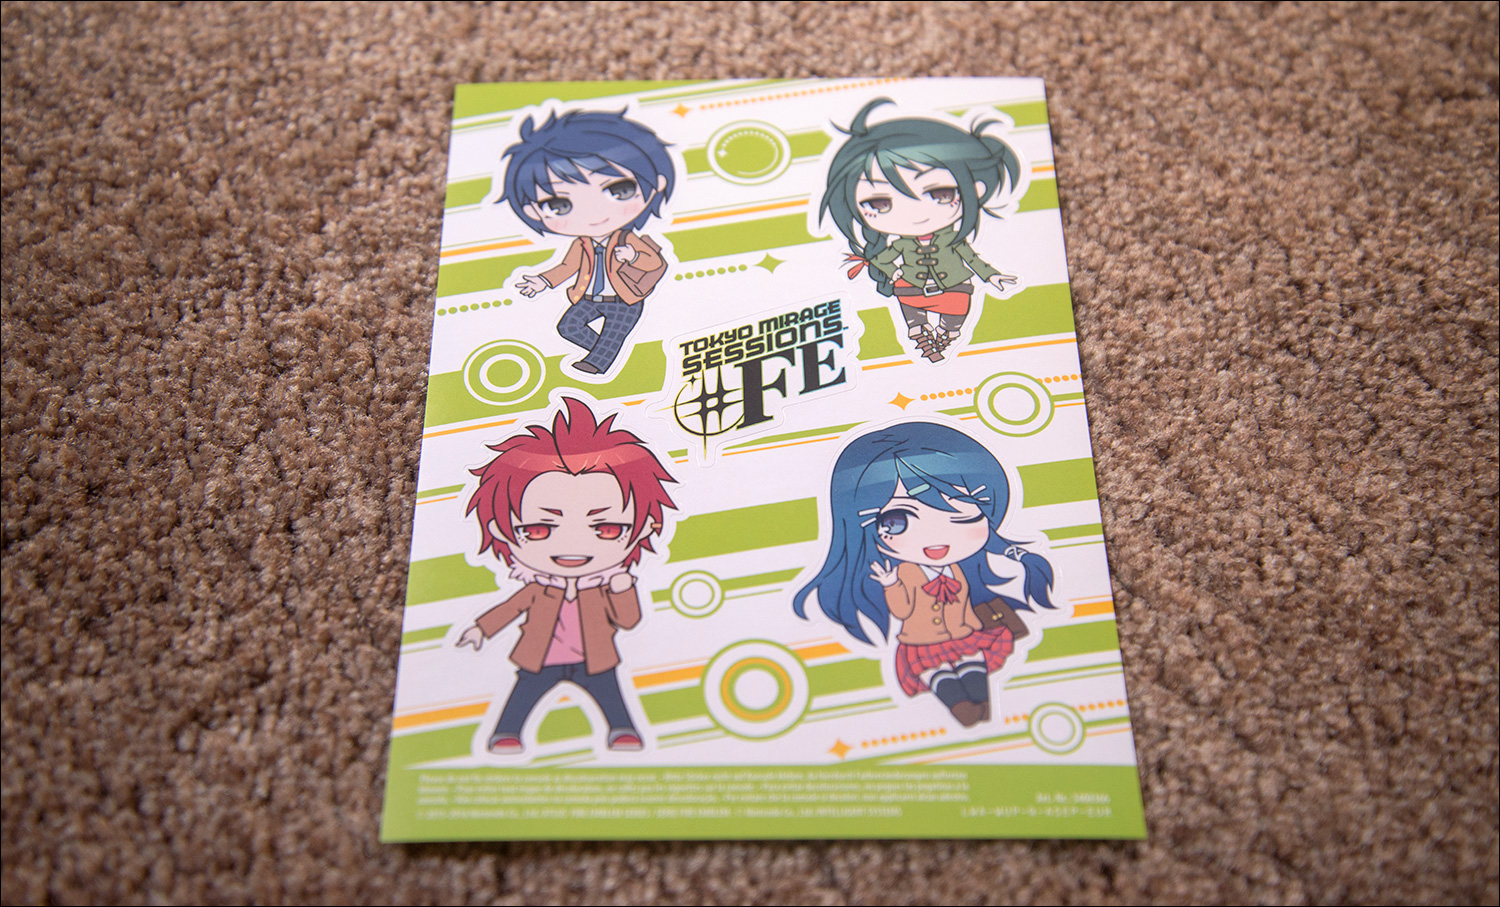 Tokyo-Mirage-Sessions-FE-Fortissimo-Edition-Stickers